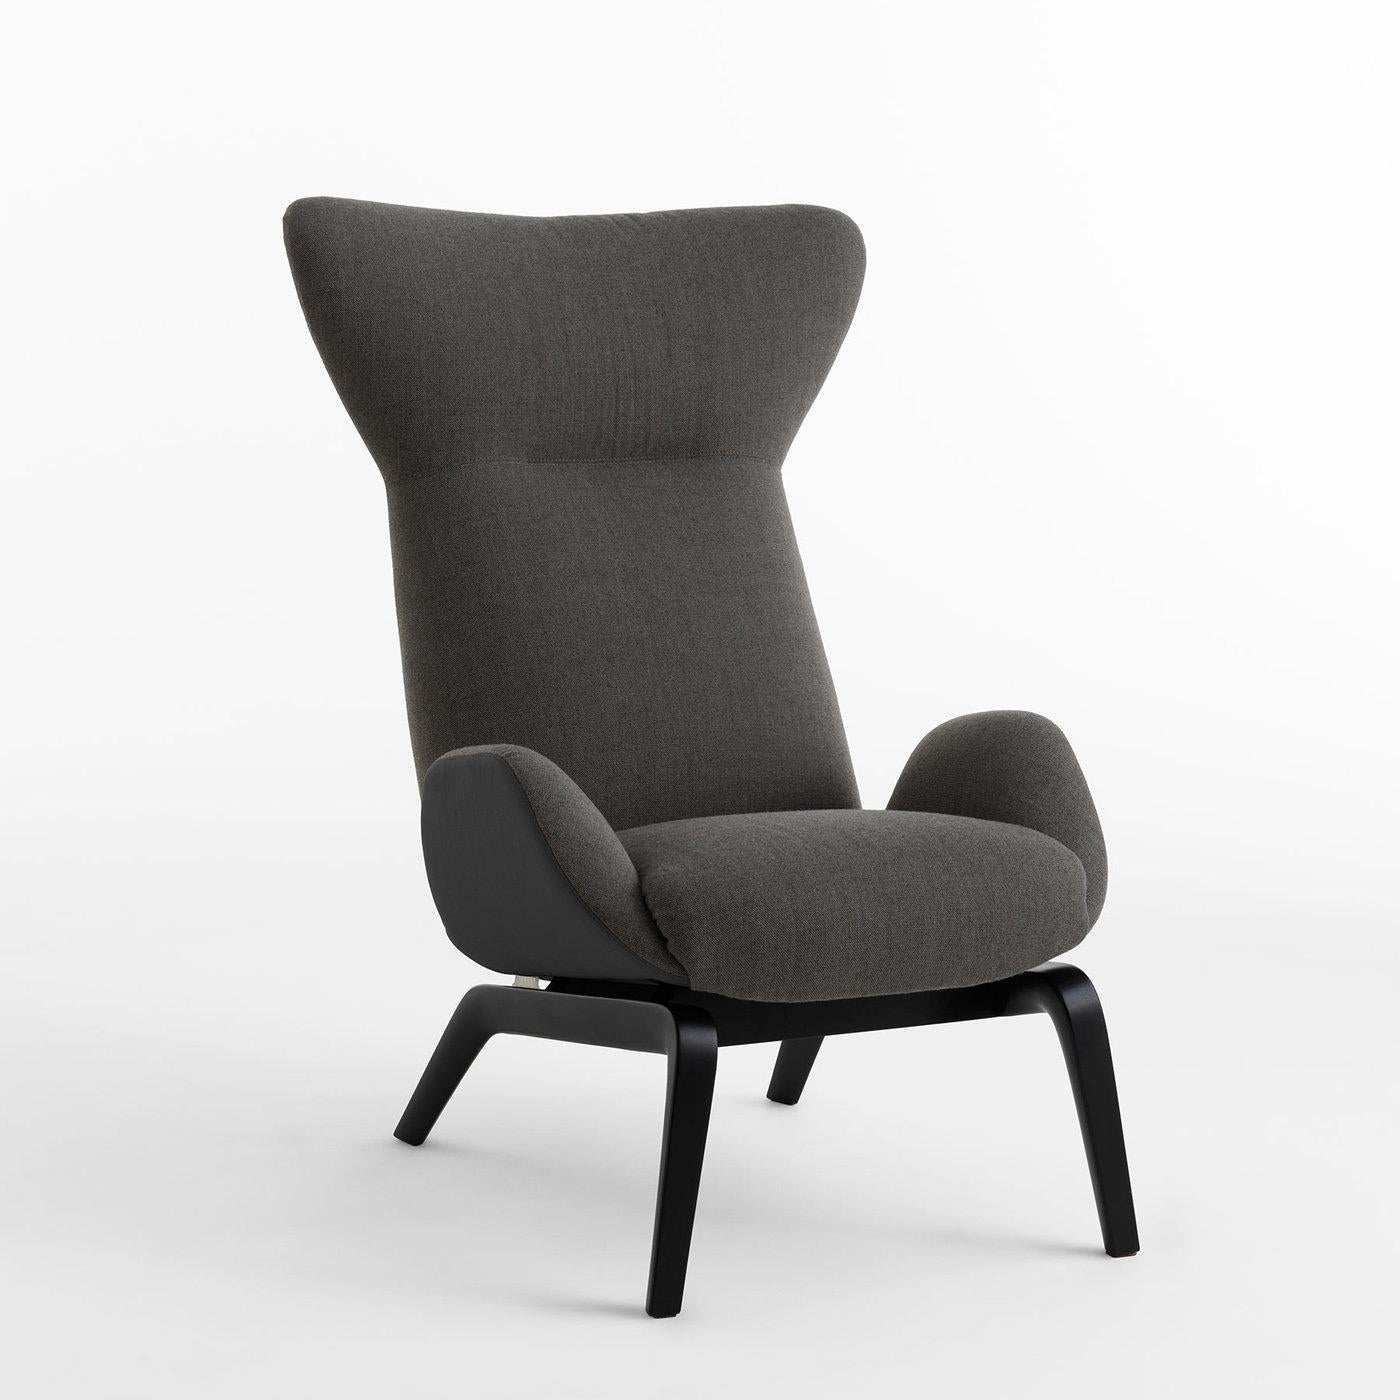 Inspired by Scandinavian style of interior design, this stunning armchair boasts gently curved lines and comfortable allure. Designed by Studio Balutto and crafted with meticulous attention to details, it comprises a black ash wood base with sturdy